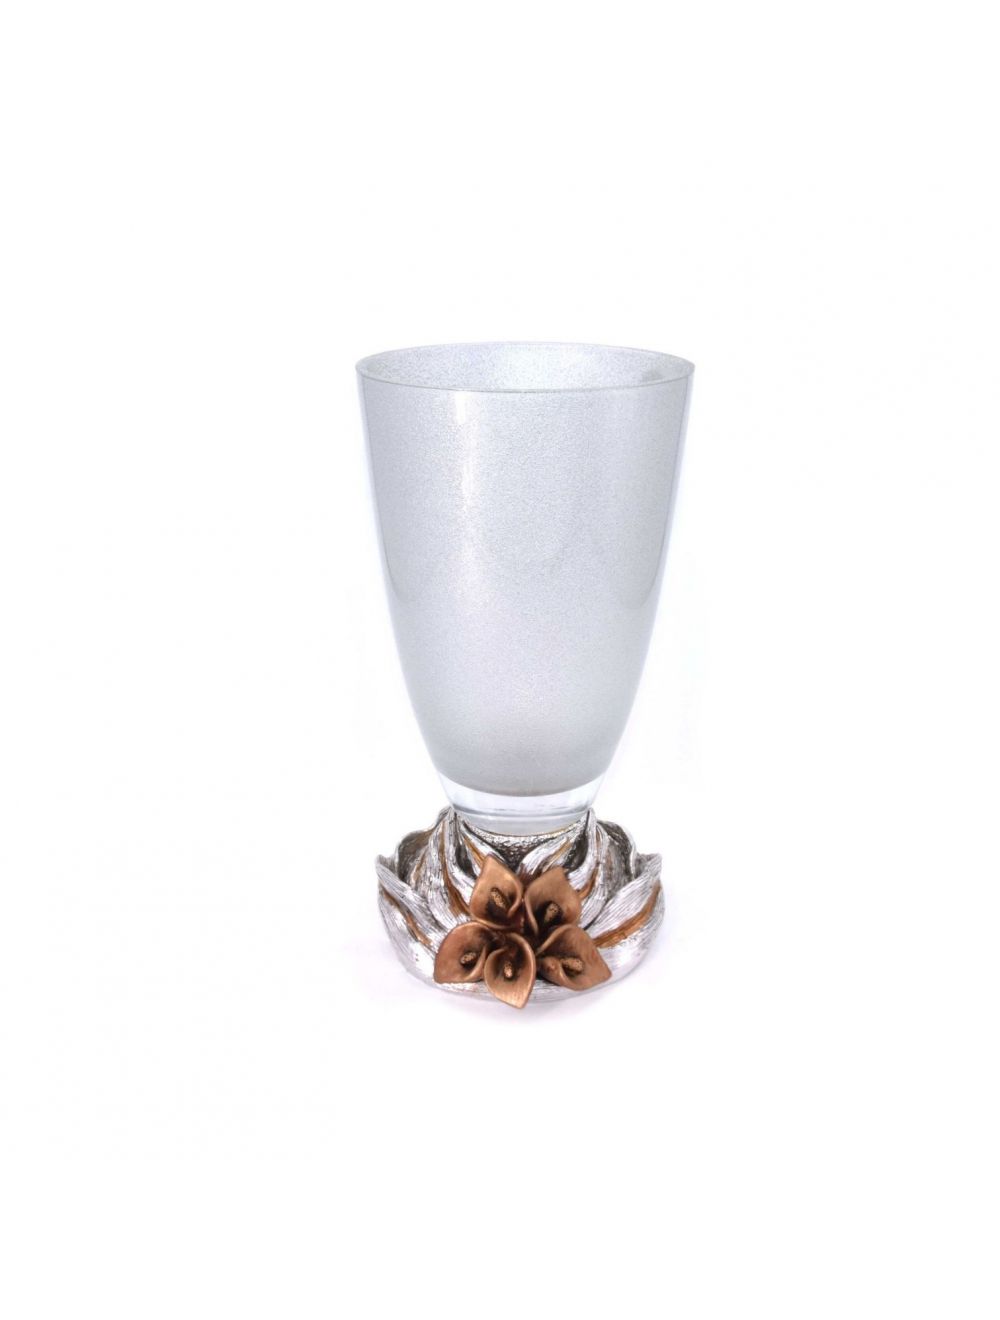 Silver Color Vase With Brown Flower Design In Stand 30 cm